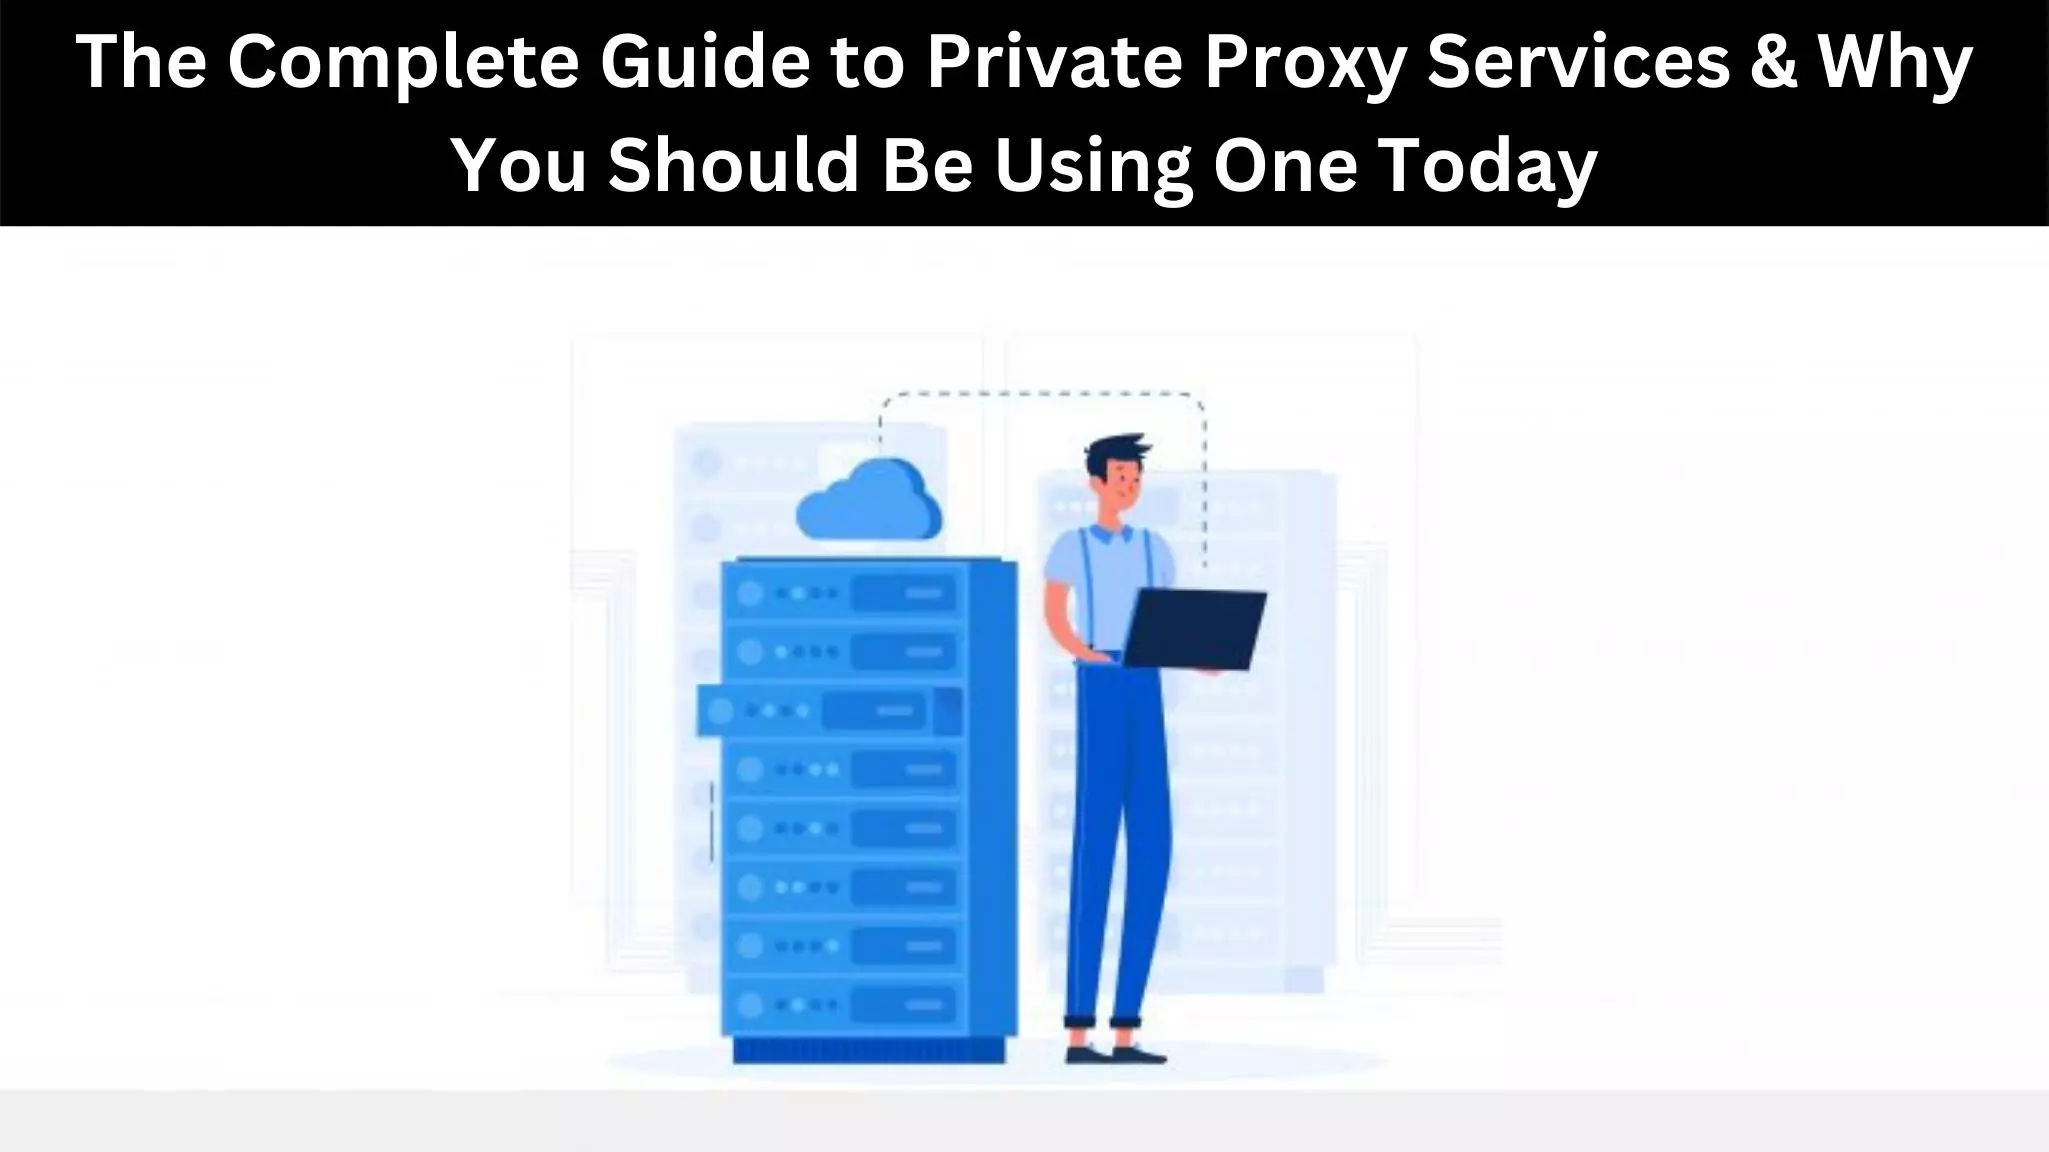 The Complete Guide to Private Proxy Services & Why You Should Be Using One Today